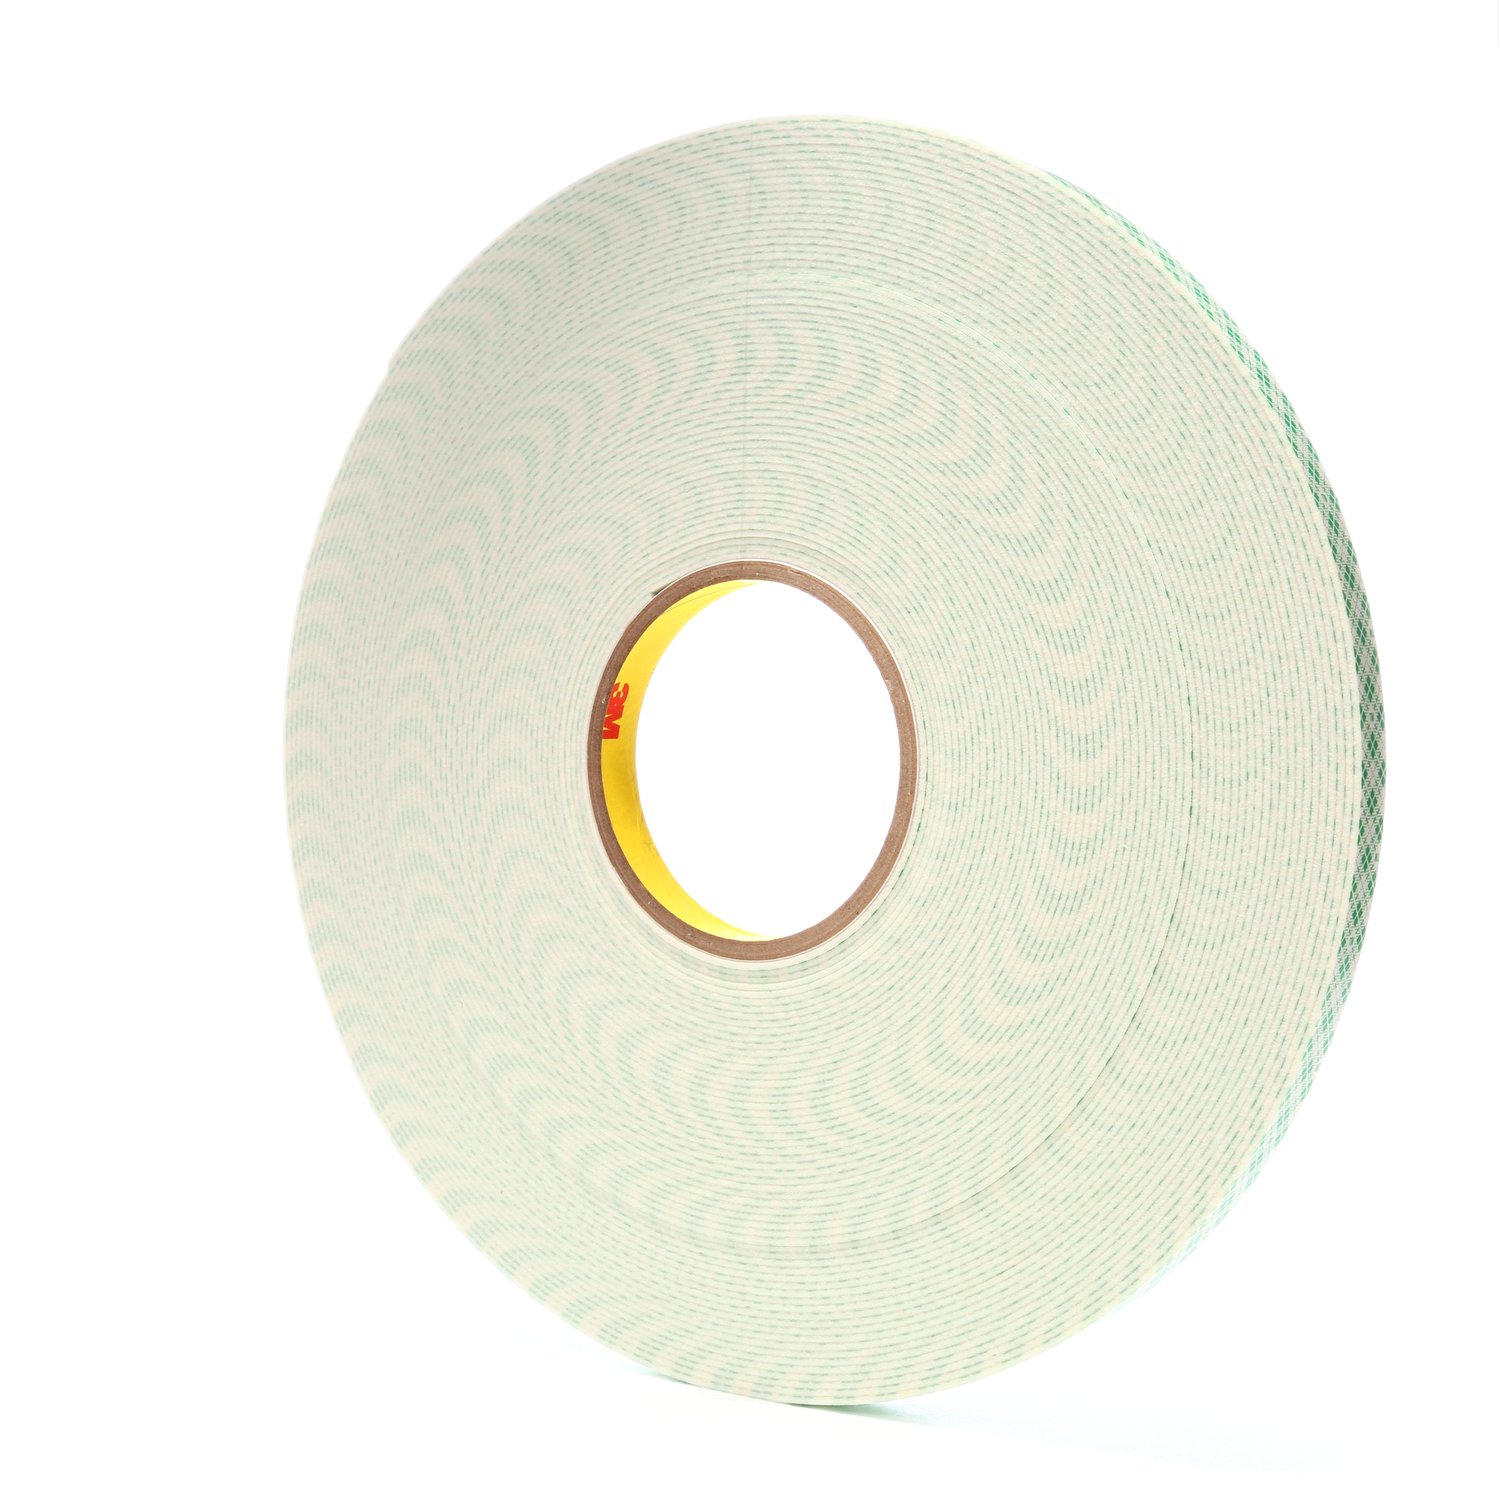 7000123338 - 3M Double Coated Urethane Foam Tape 4026, Natural, 1/2 in x 36 yd, 62
mil, 18 Rolls/Case